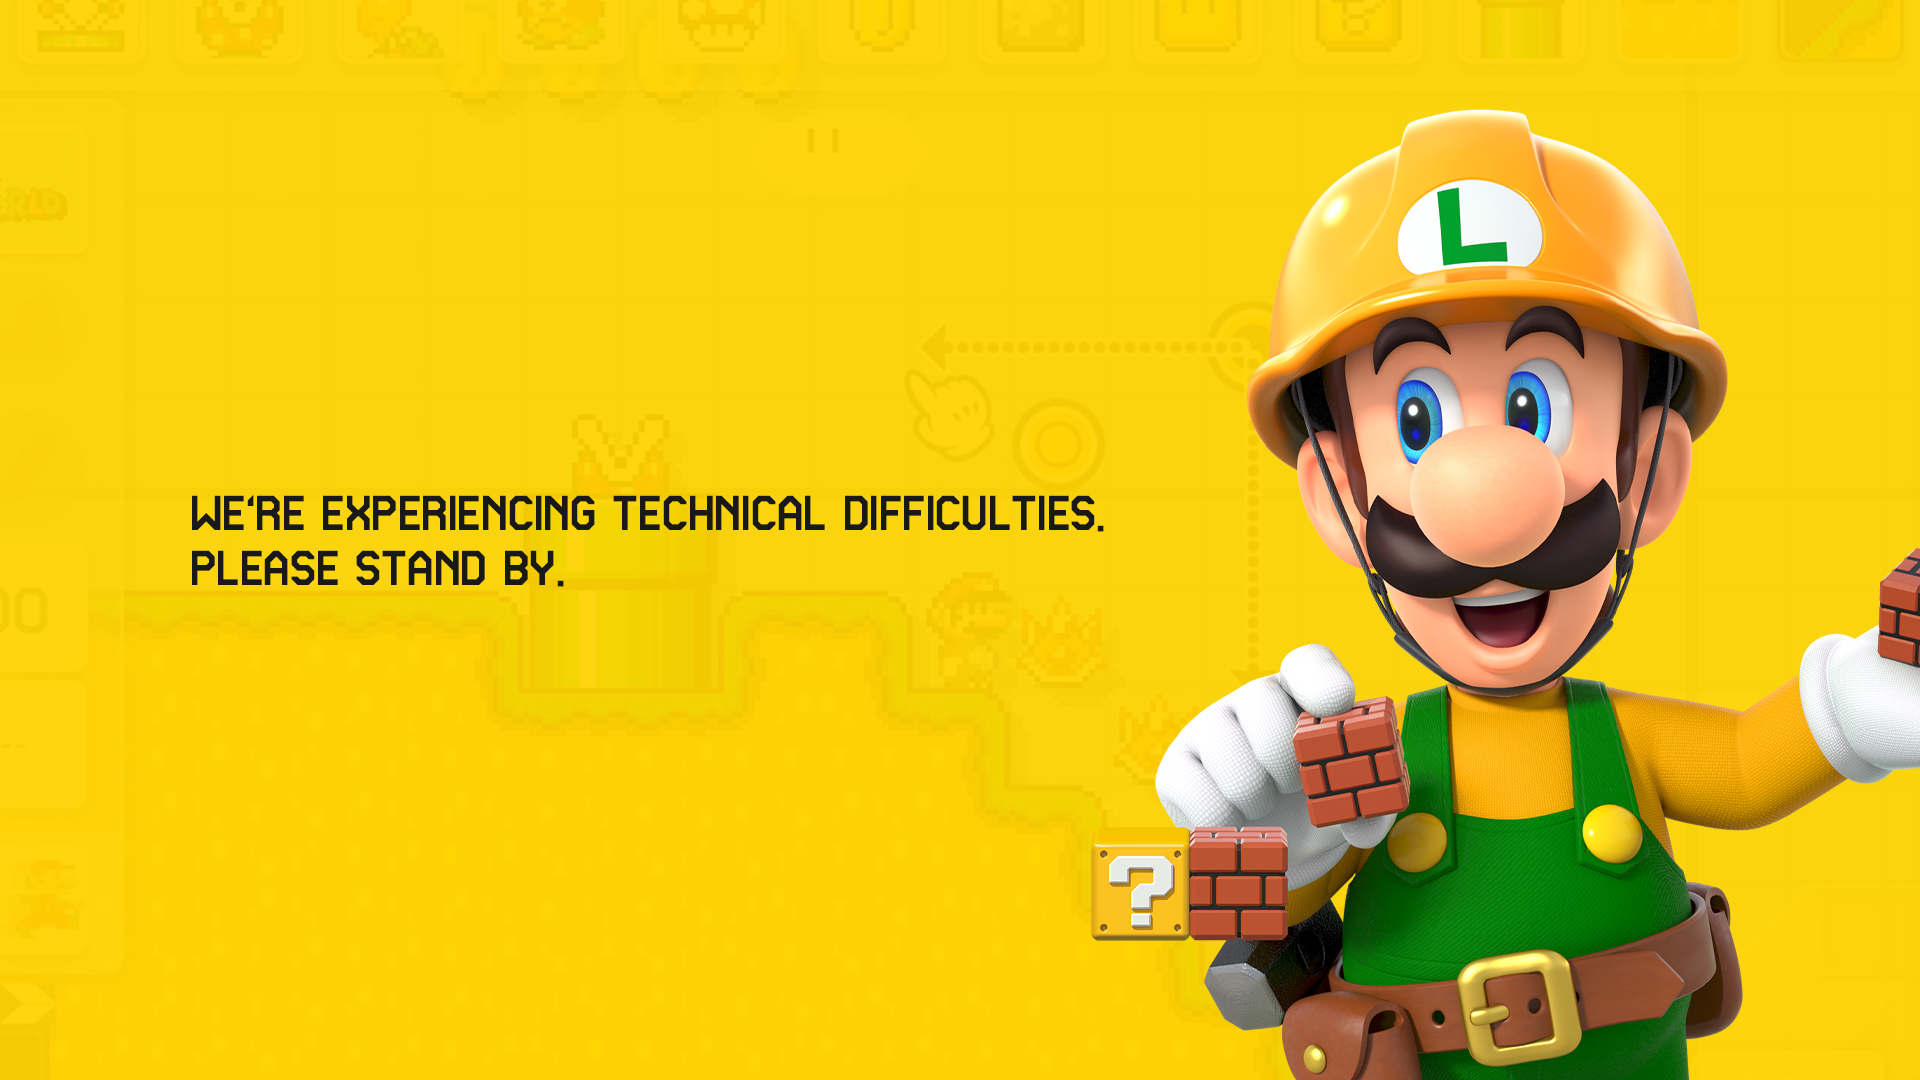 Mario Maker 2 Live Difficulties